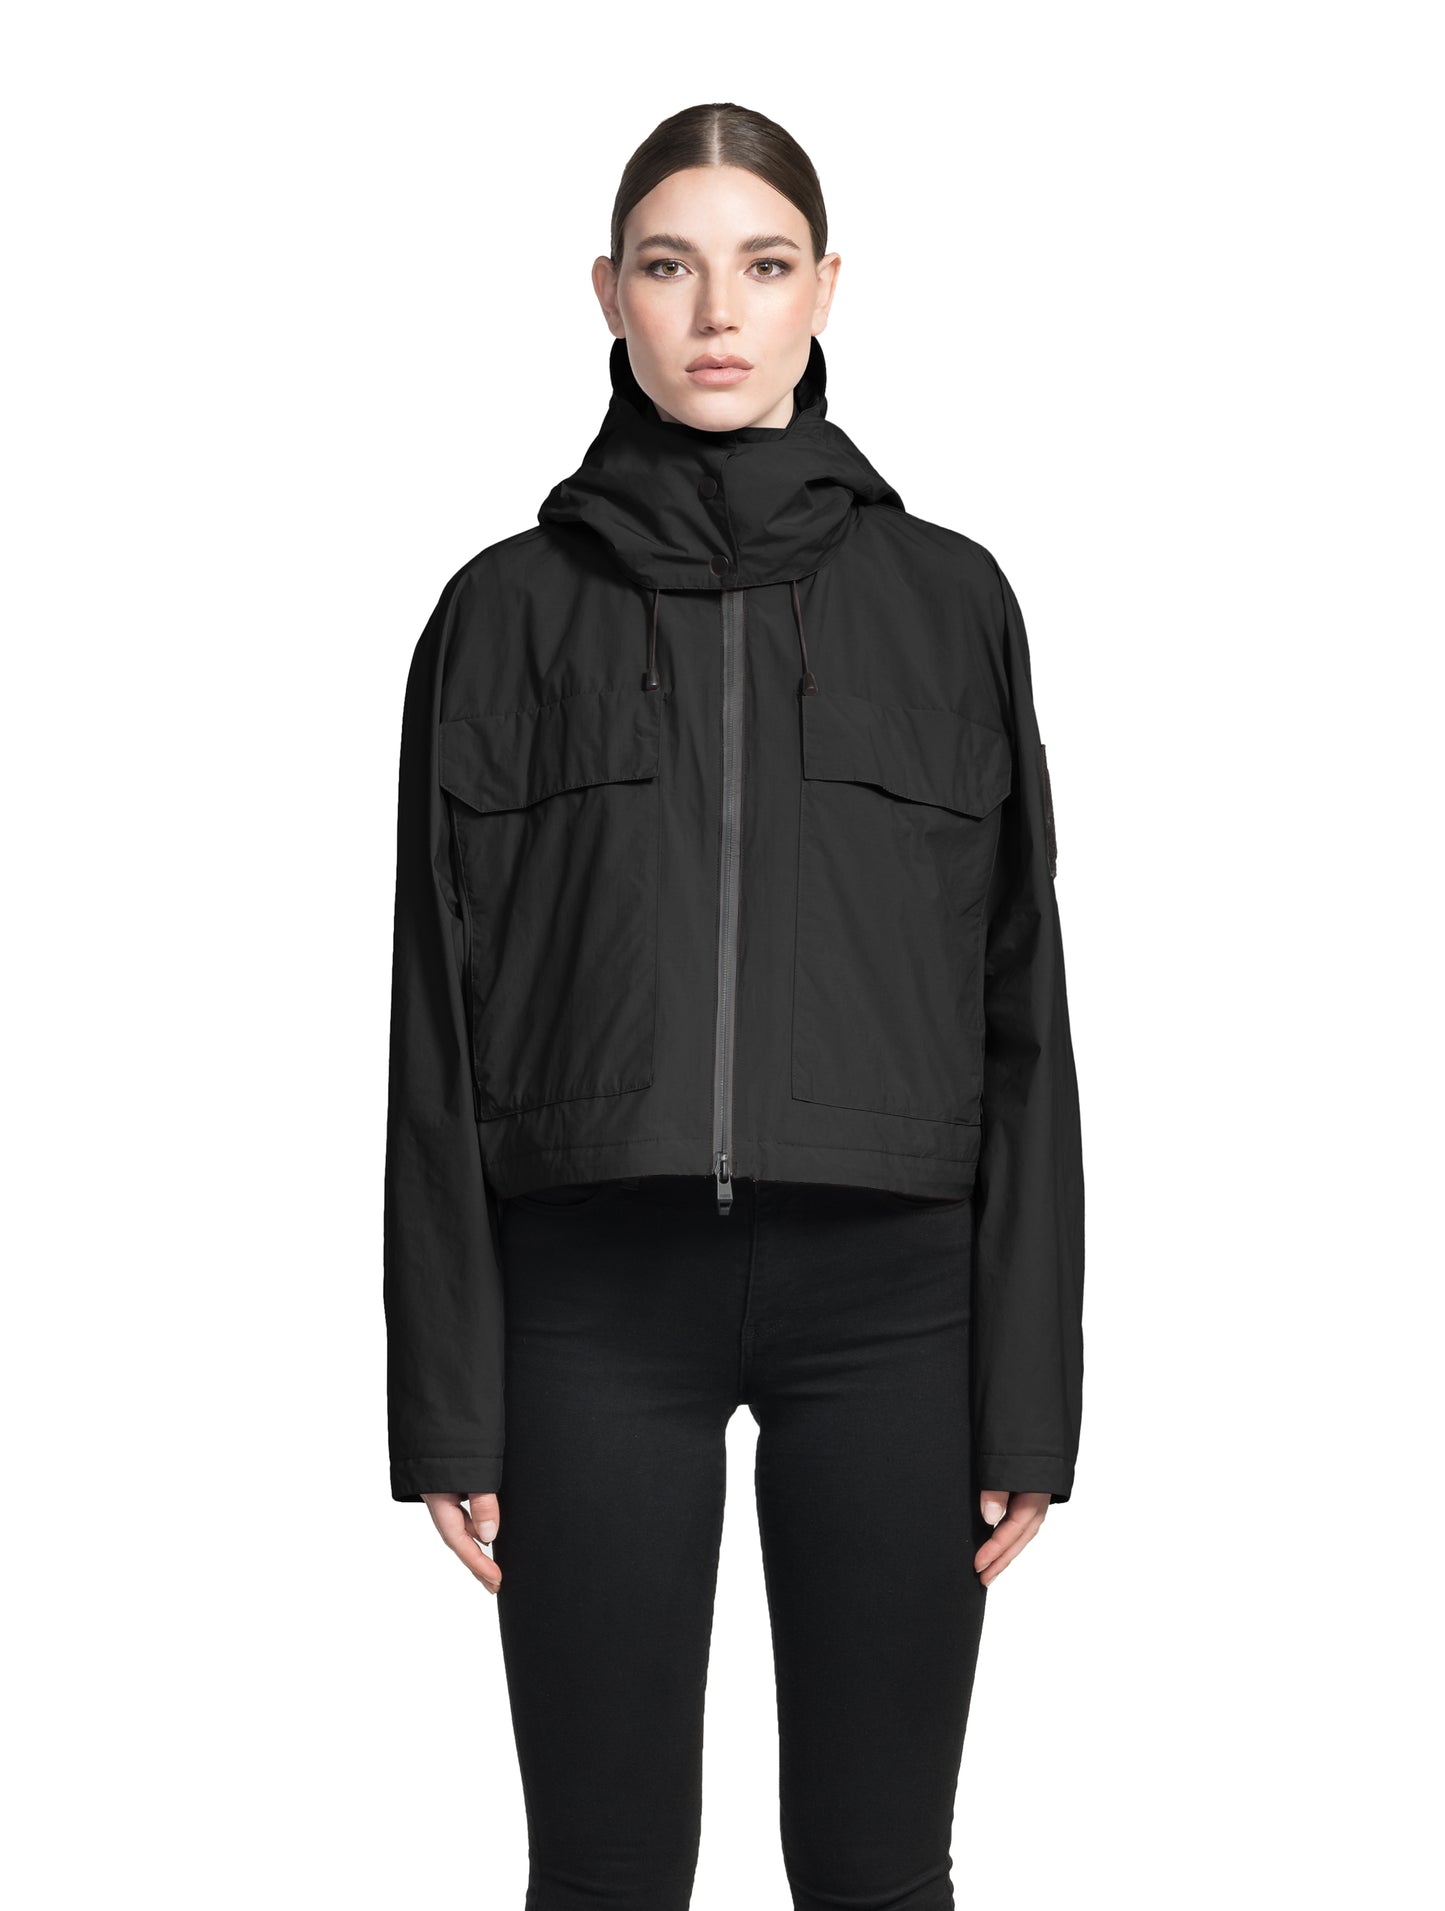 Viva Women's Performance Cropped Jacket in waist length, premium iridescent fabrication, removable hood with peak, adjustable hood draw cords and toggle, 2-way branded zipper at centre front, oversized magnetic closure flap pockets at chest with side entry, interior adjustable draw cord at hem, large interior zipper pocket, and adjustable snap cuffs, in Black